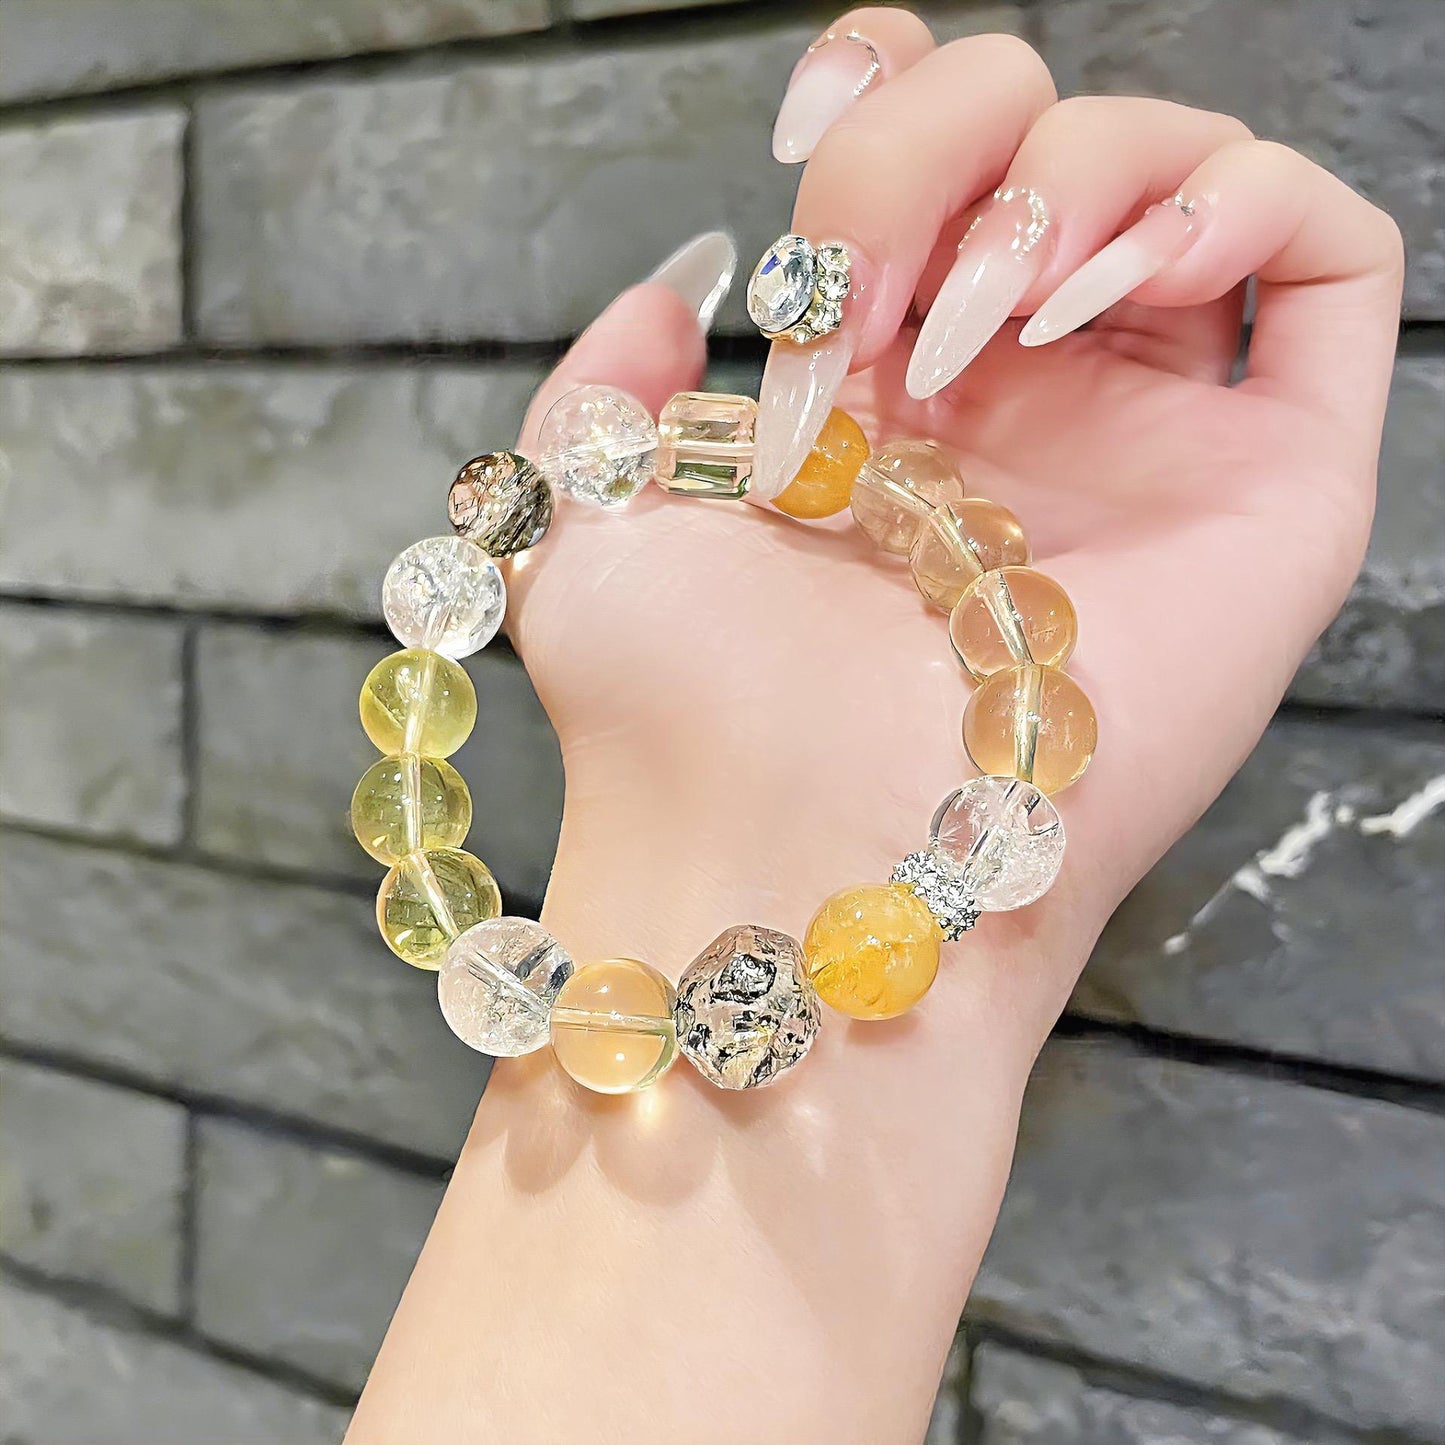 August.May your dreams come true.Advanced handmade custom natural crystal bracelet